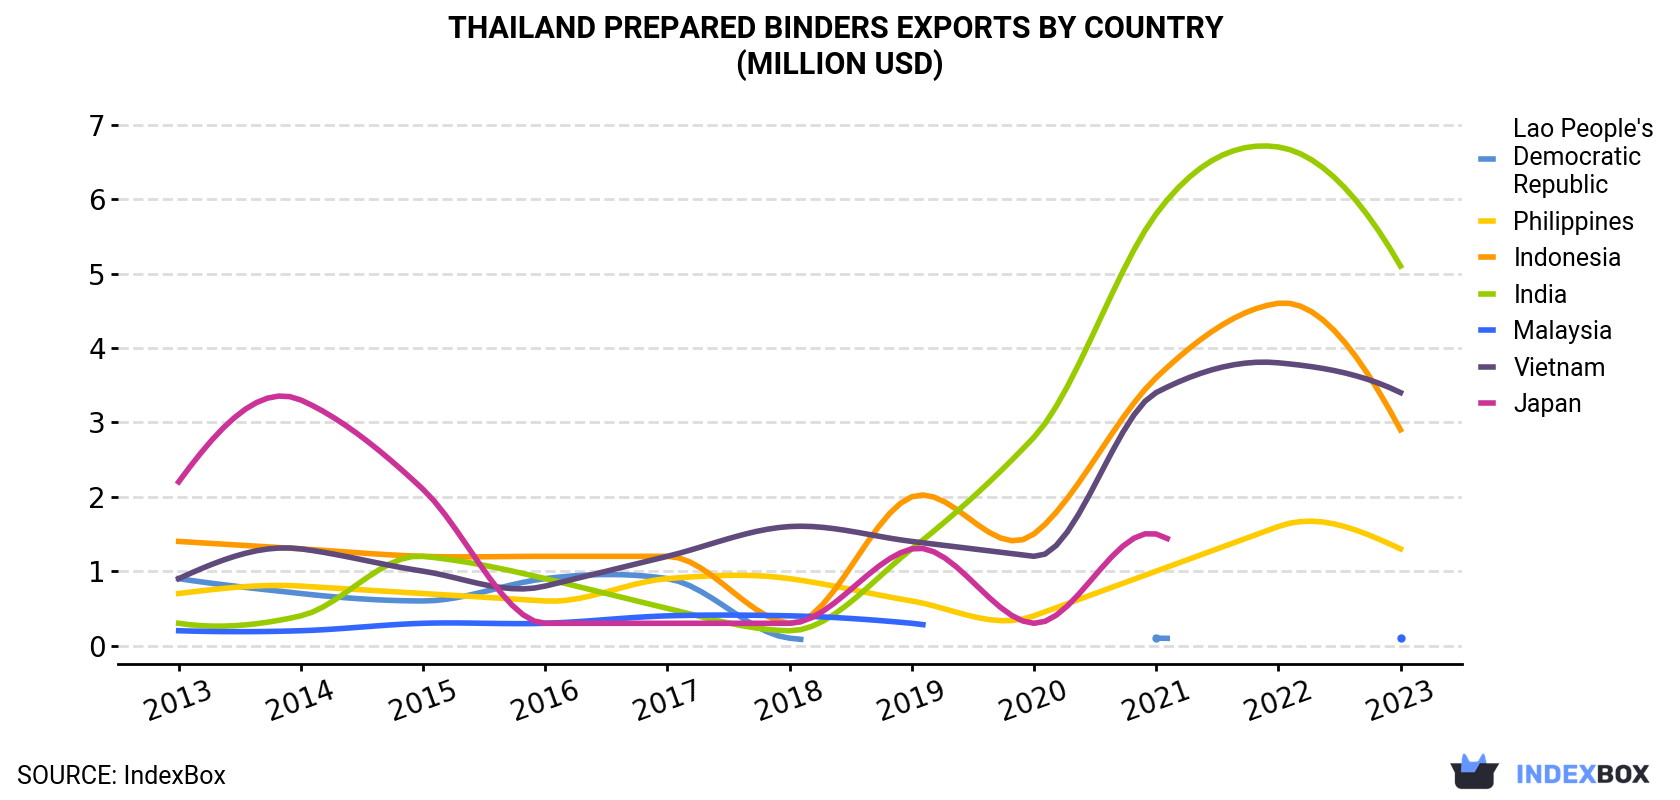 Thailand Prepared Binders Exports By Country (Million USD)